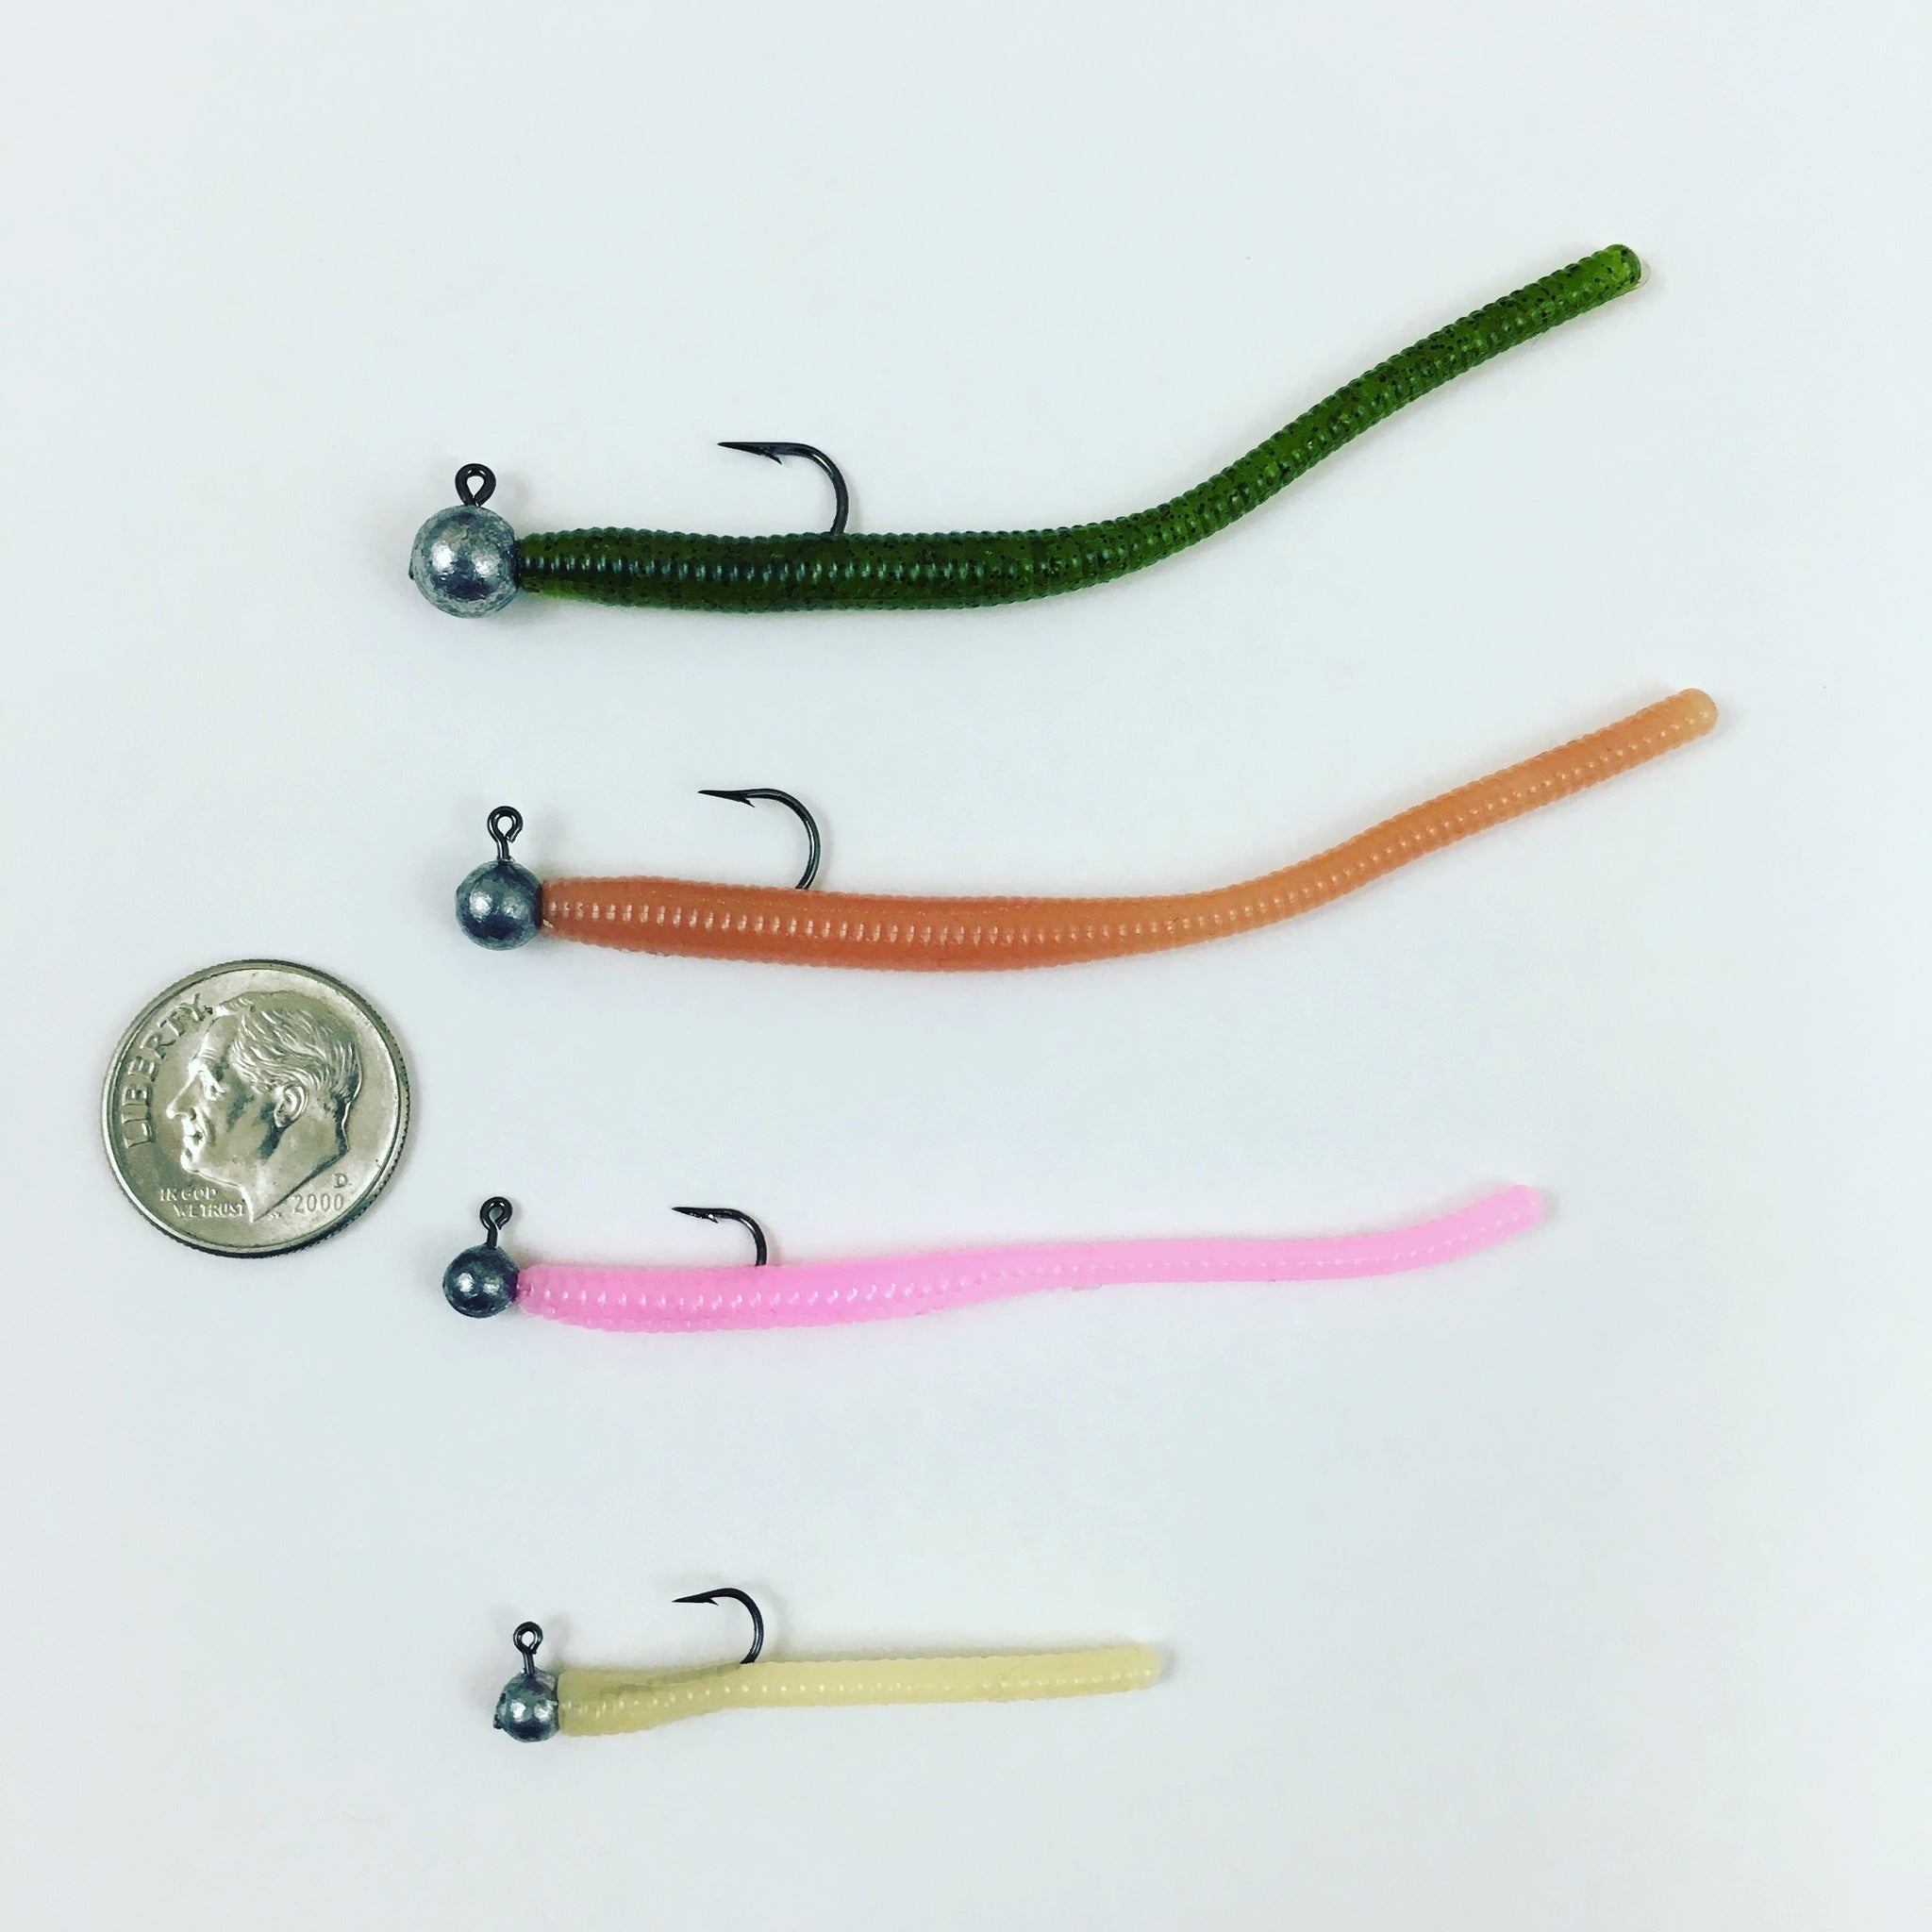 Trout Worms with Egg: Pink Leech – Peter's Custom Trout Worms